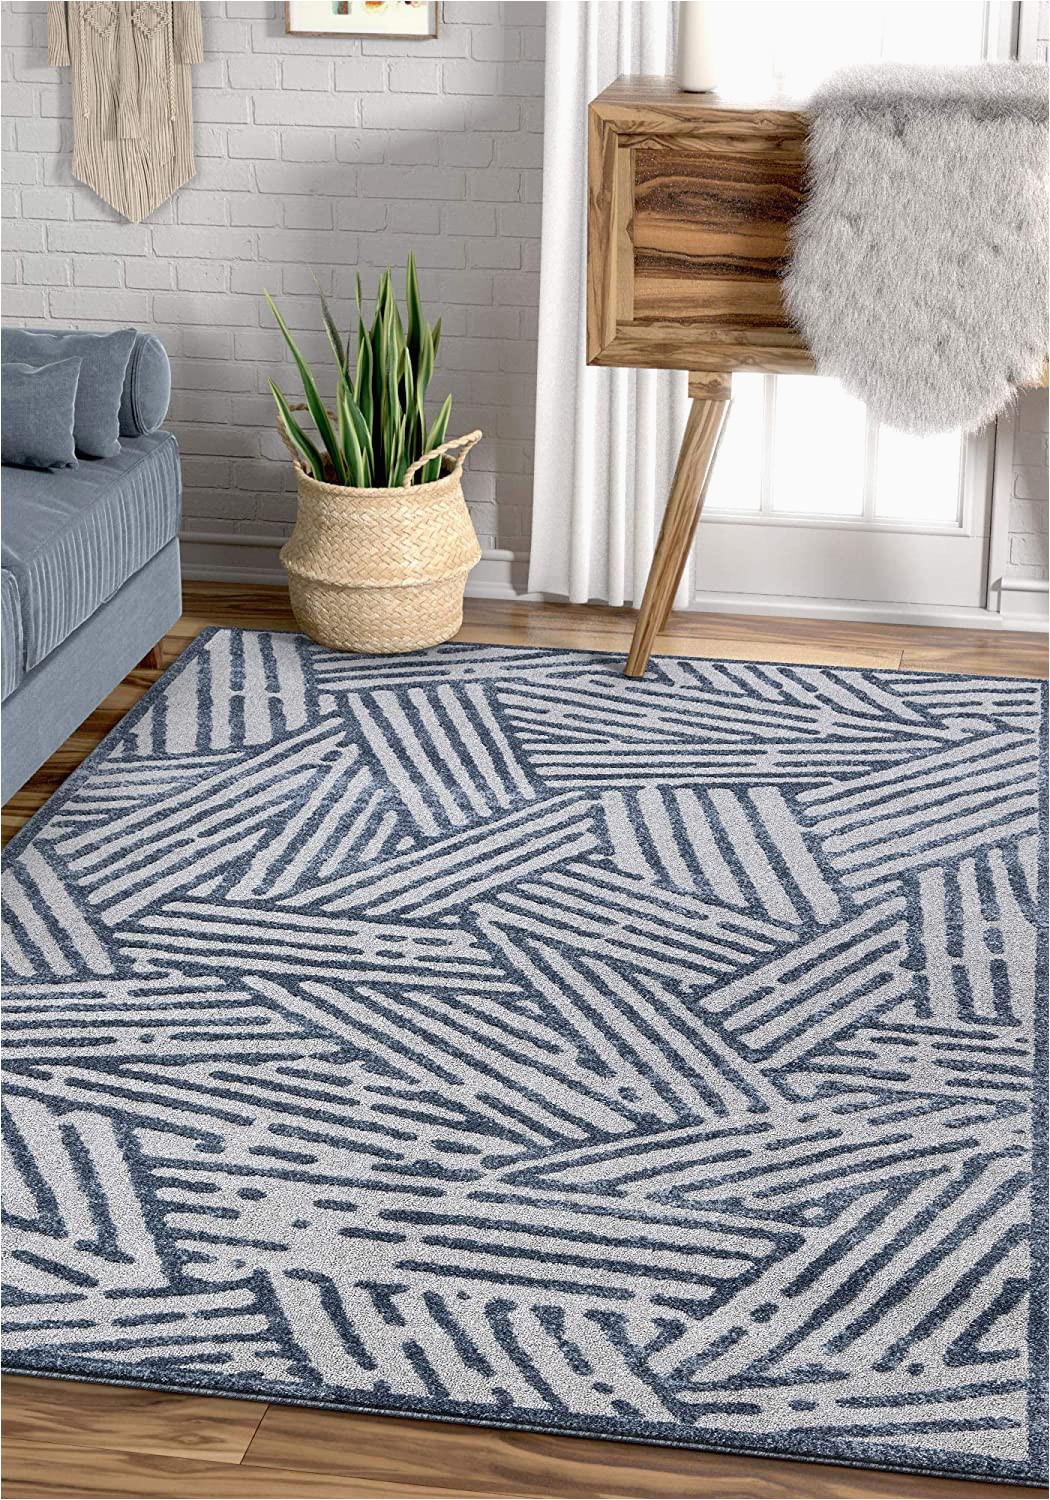 Cheap 5 by 7 area Rugs Well Woven Cella Blue Geometric Lines Pattern area Rug 5×7 5 3" X 7 3"